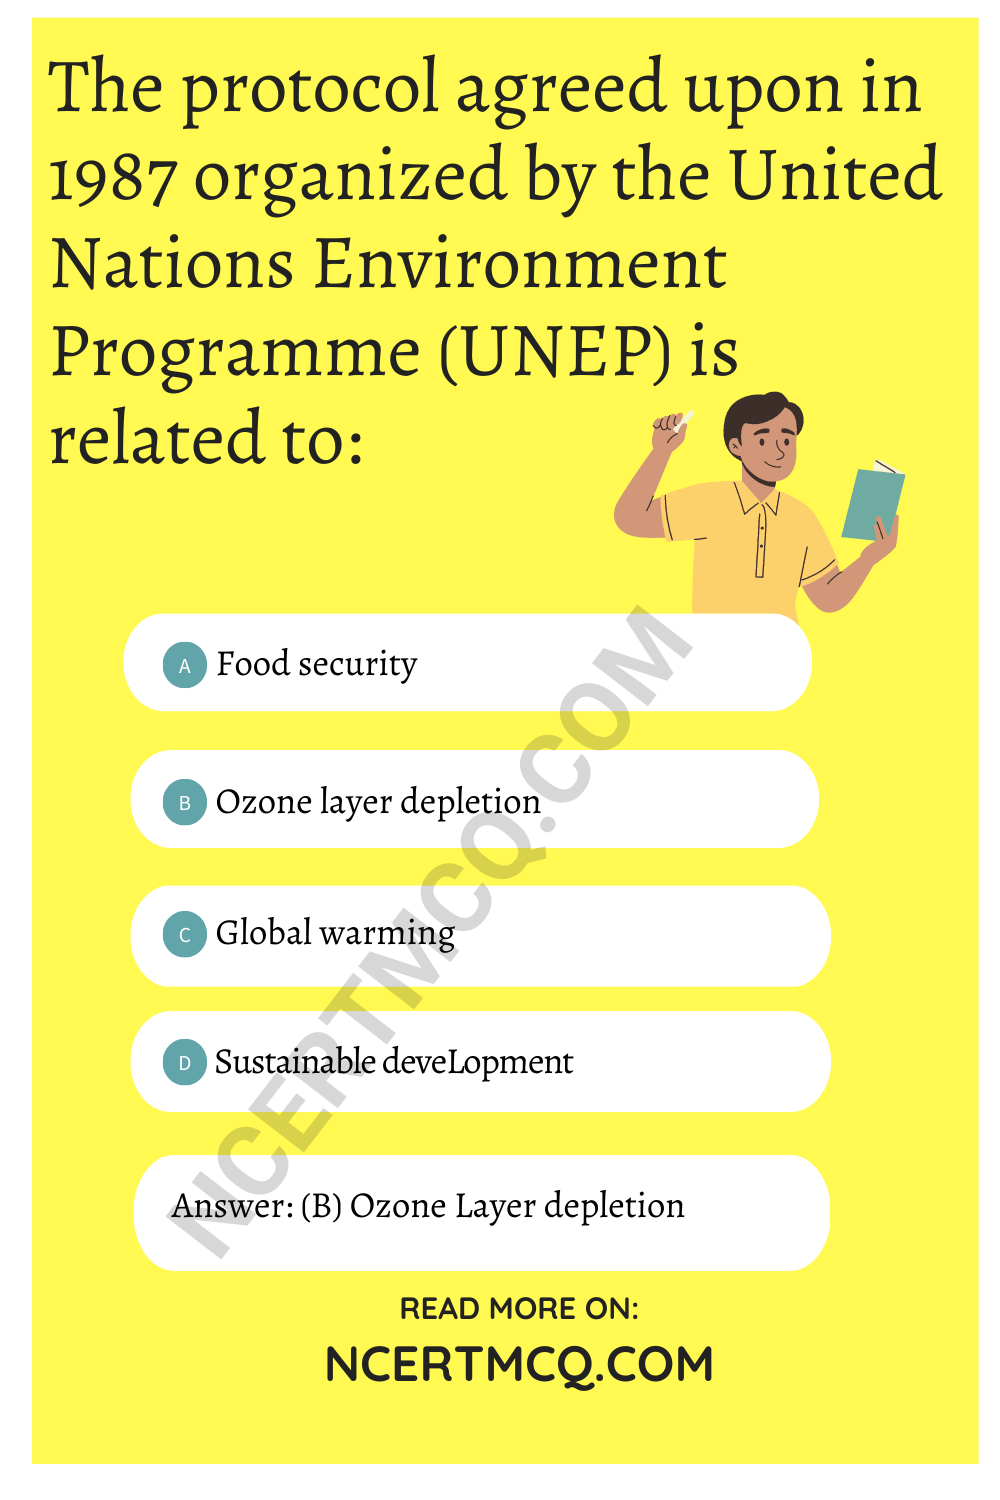 The protocol agreed upon in 1987 organized by the United Nations Environment Programme (UNEP) is related to: